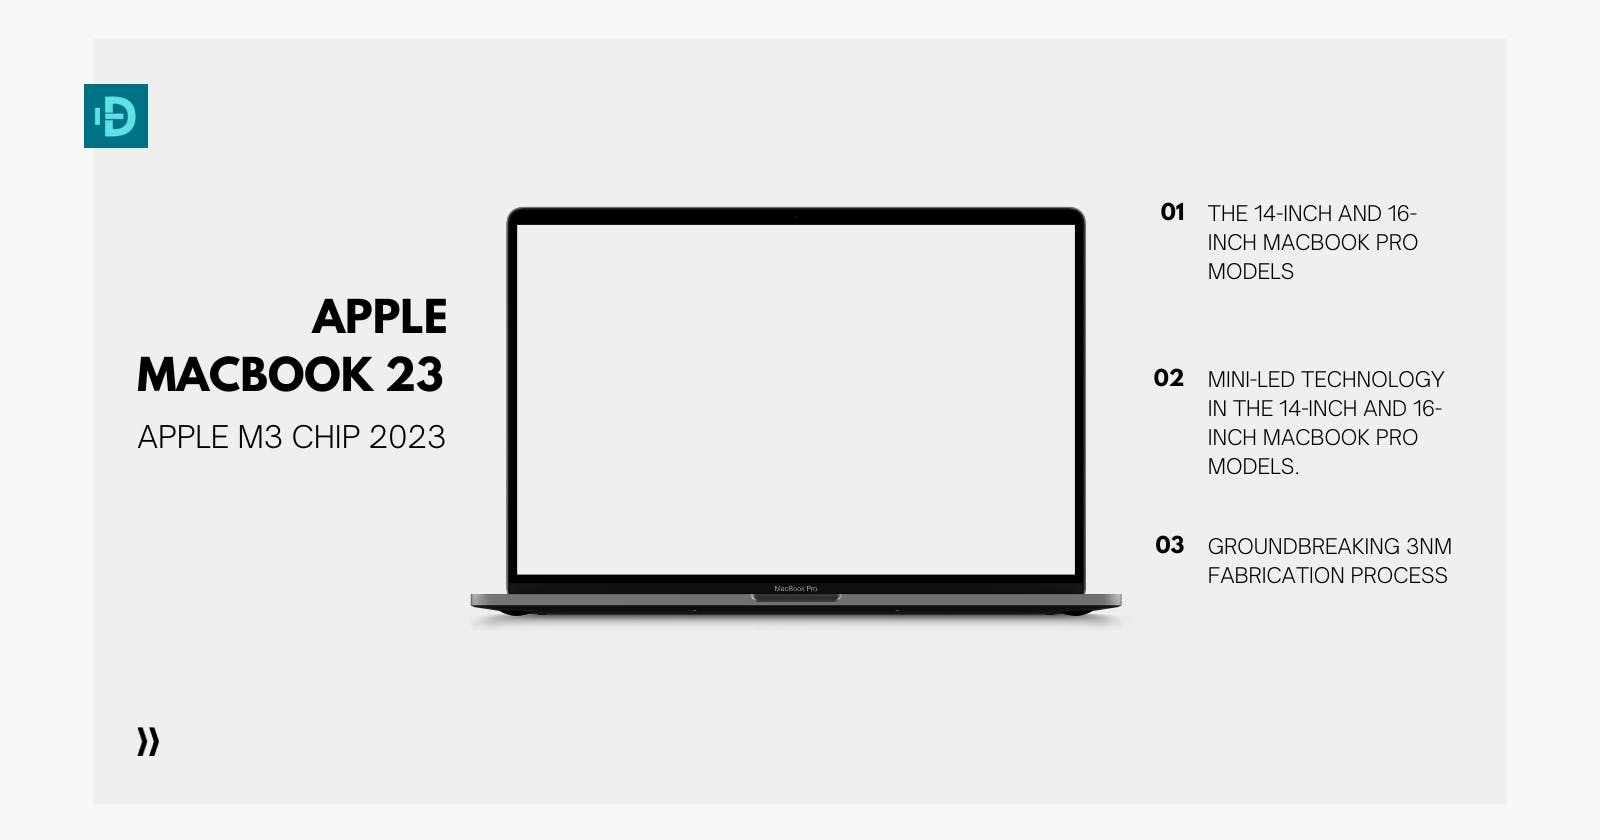 Apple's Next-Generation MacBook Pro Lineup: What to Expect in 2023-2024